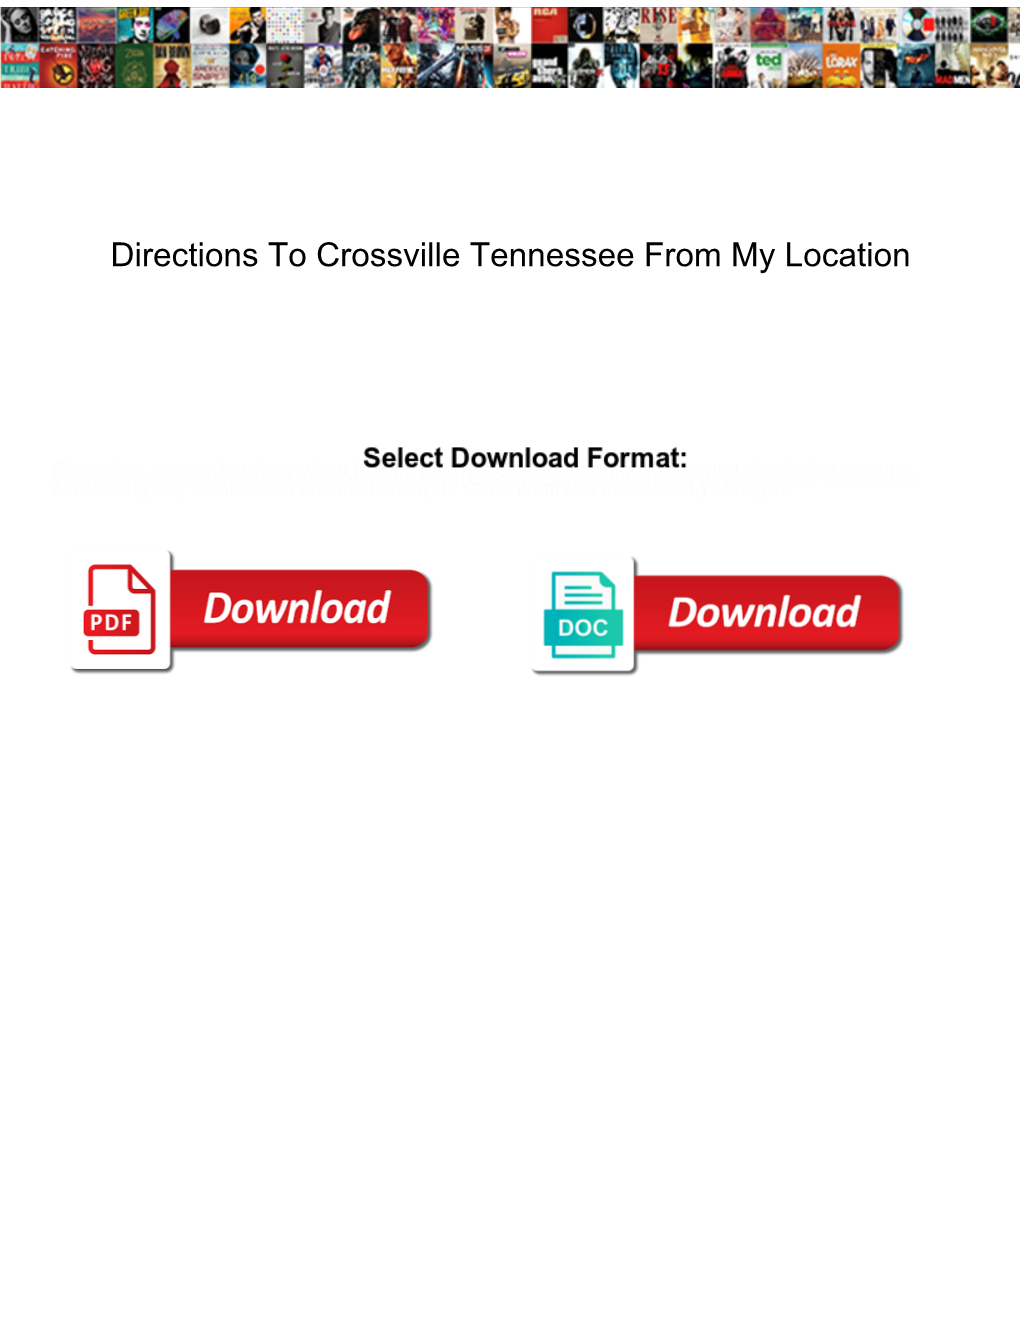 Directions to Crossville Tennessee from My Location